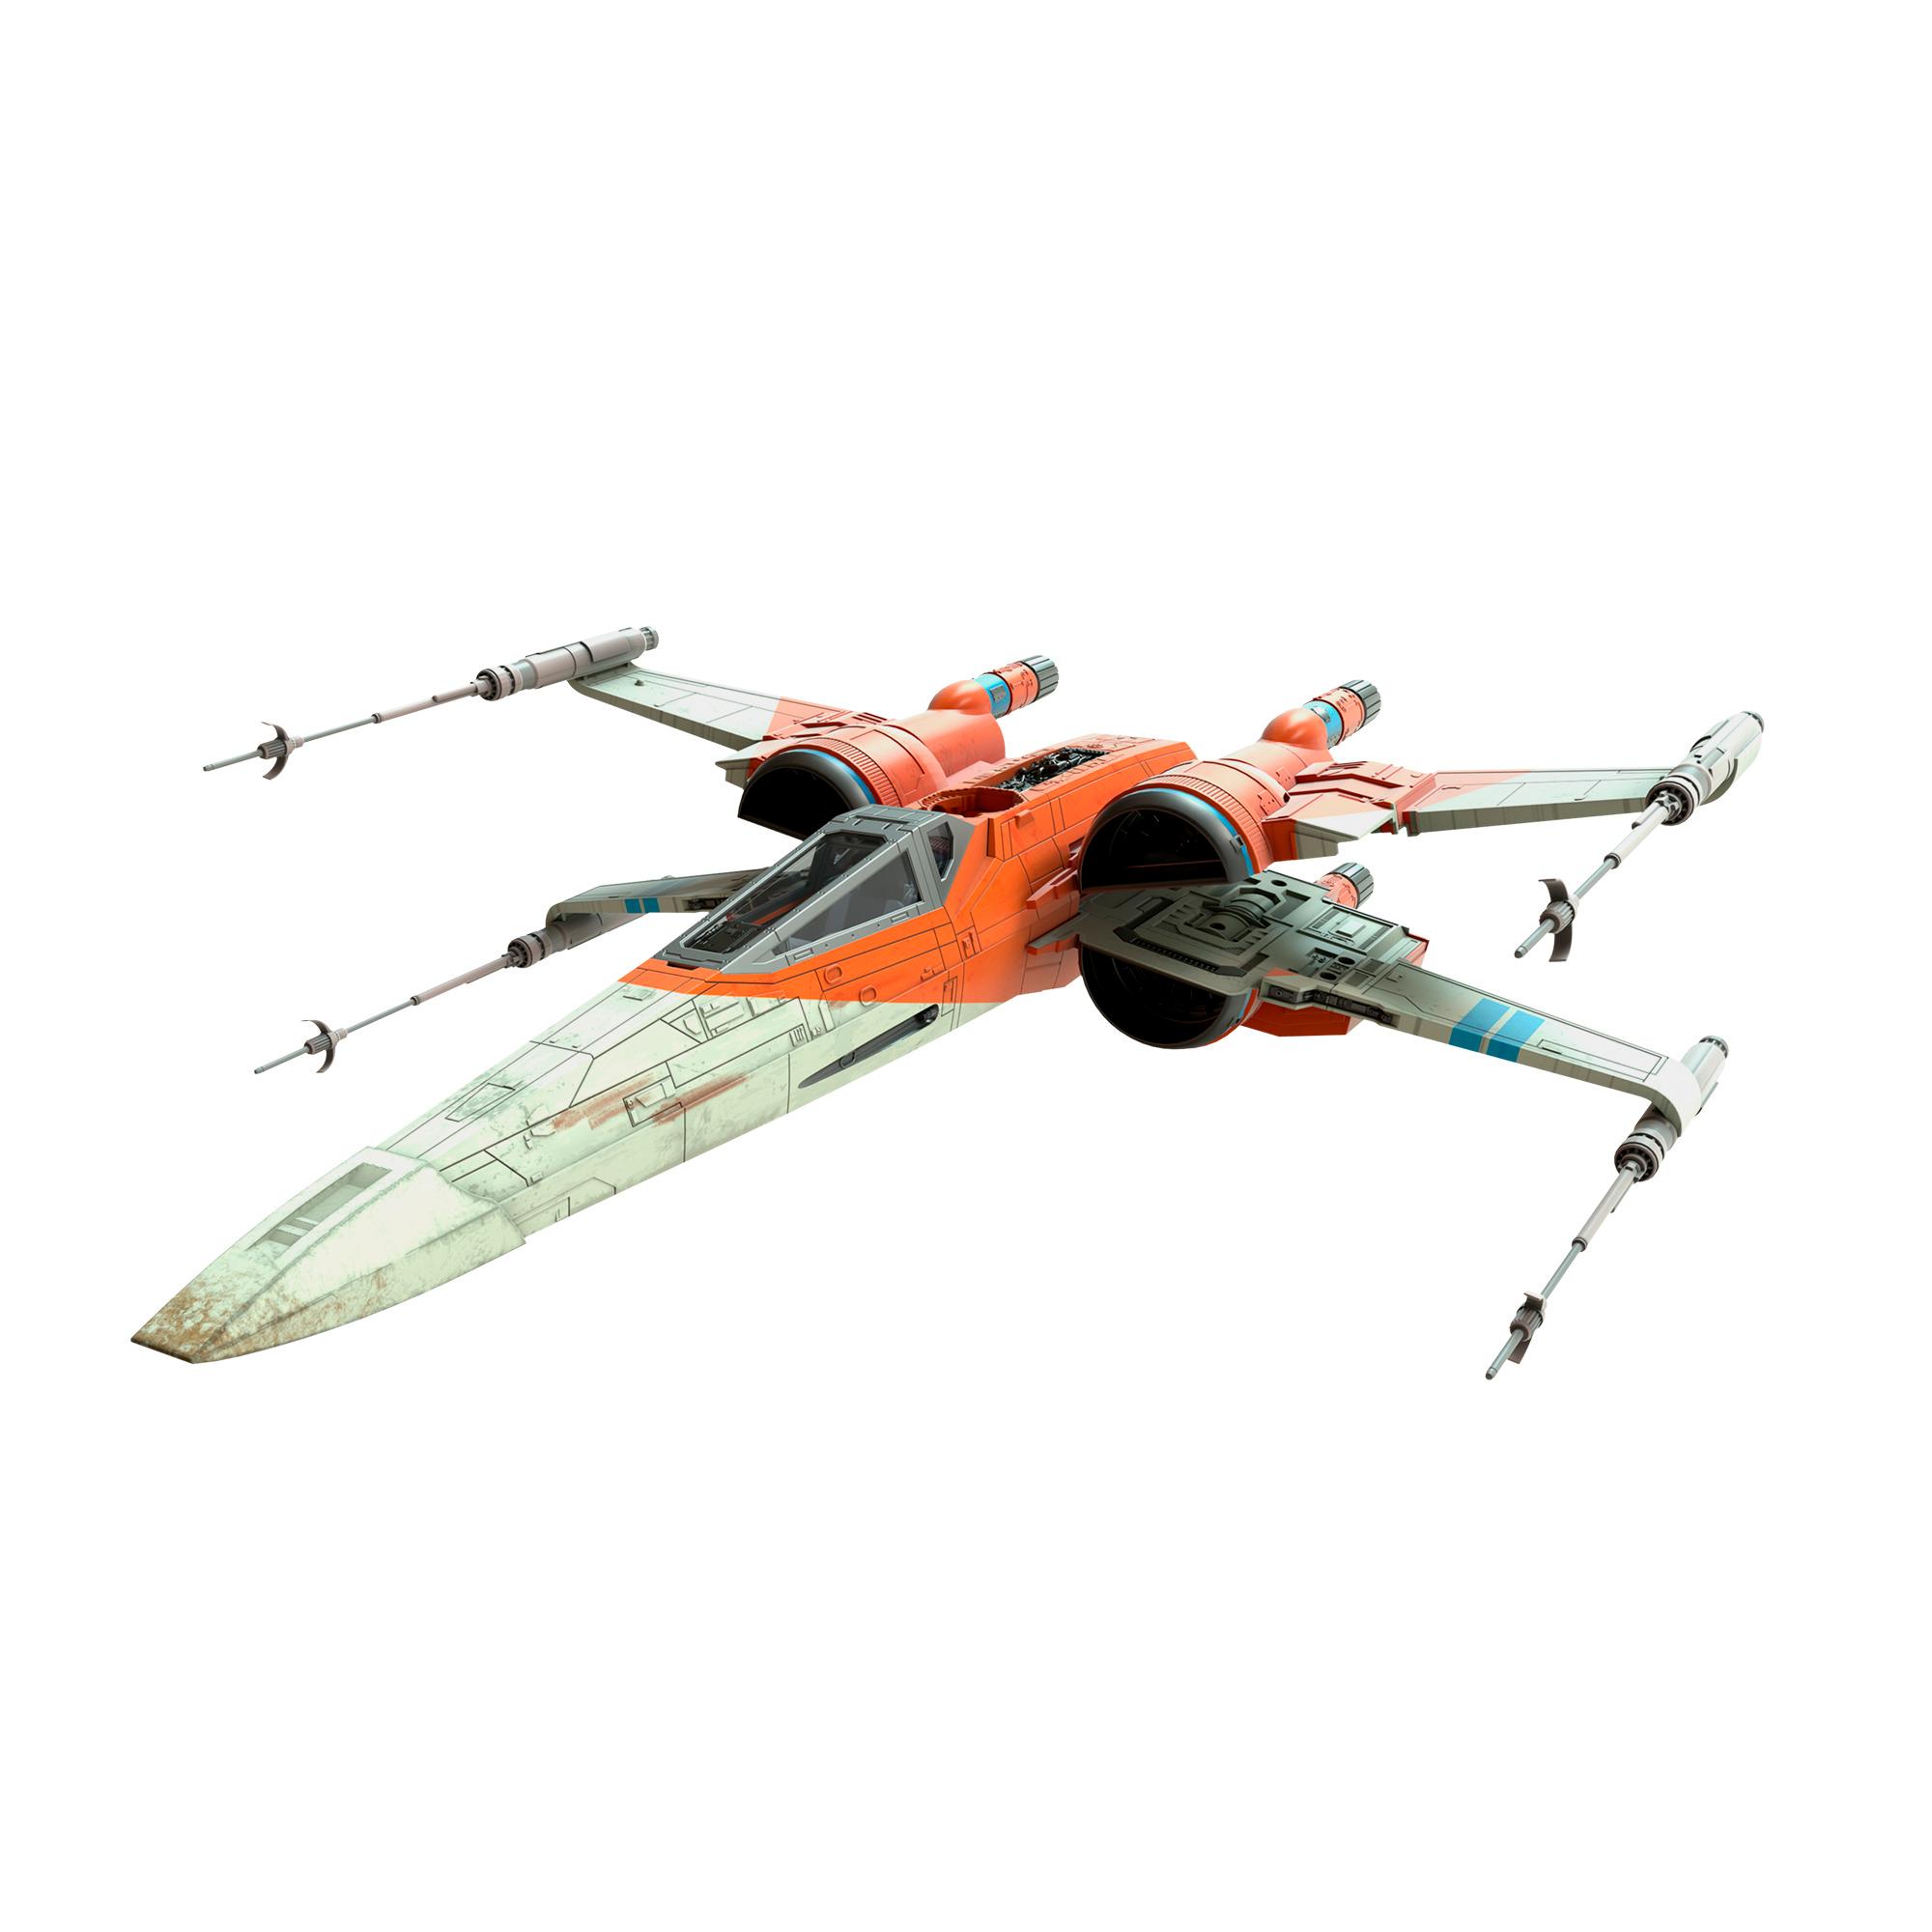 Star Wars The Vintage Collection Star Wars: The Rise of Skywalker Poe Dameron’s X-Wing Fighter Vehicle, Ages 4 and Up